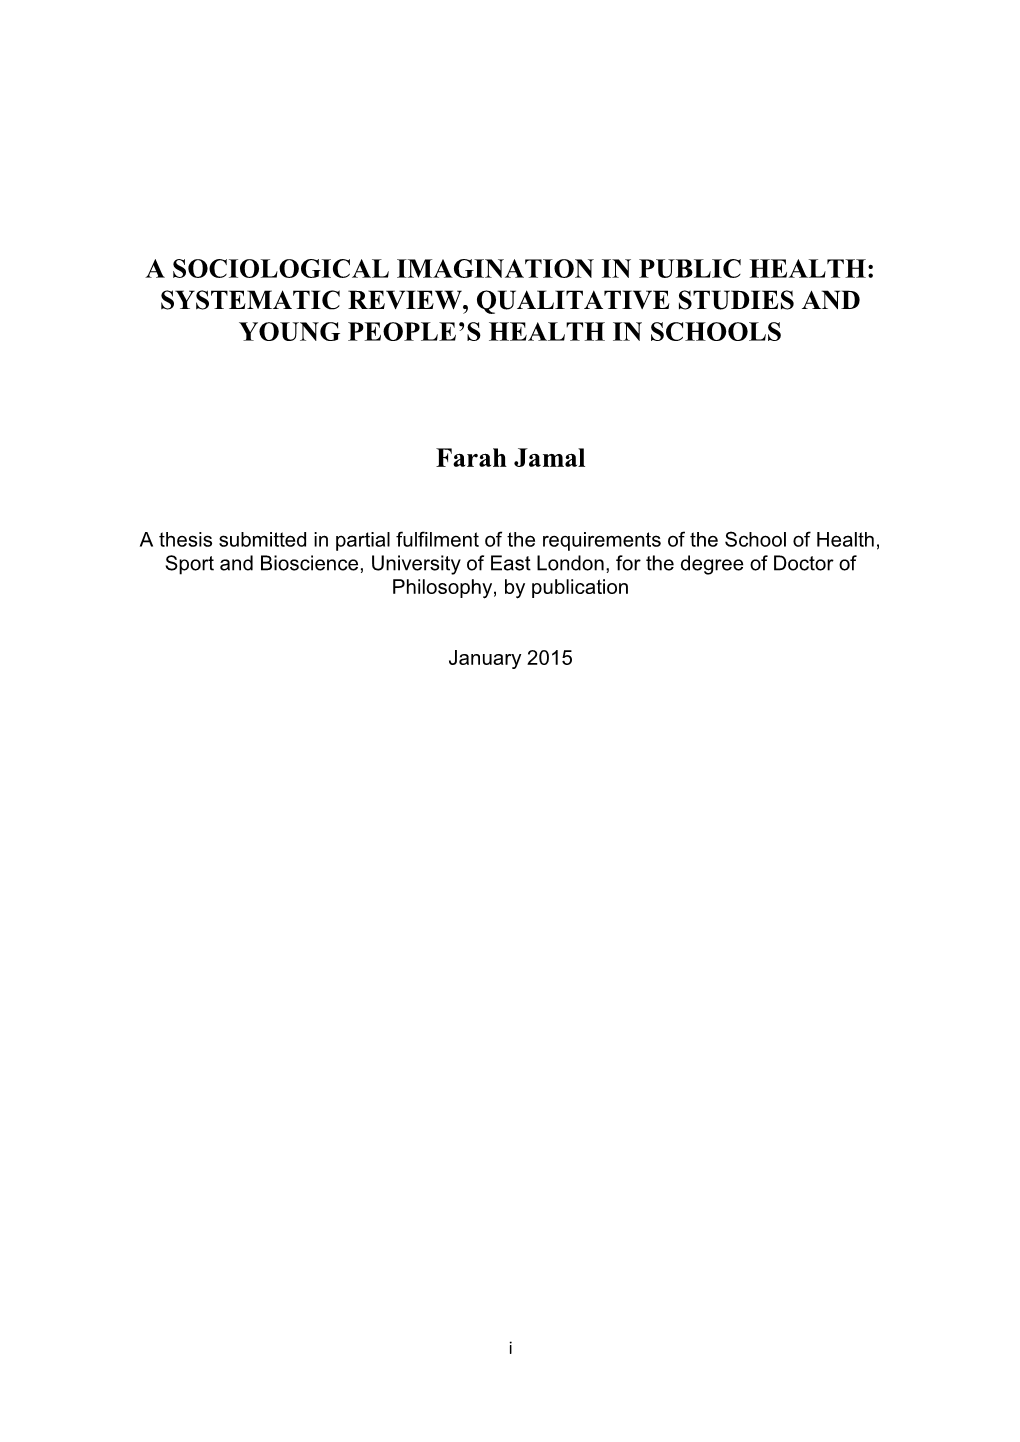 A Sociological Imagination in Public Health: Systematic Review, Qualitative Studies and Young People’S Health in Schools